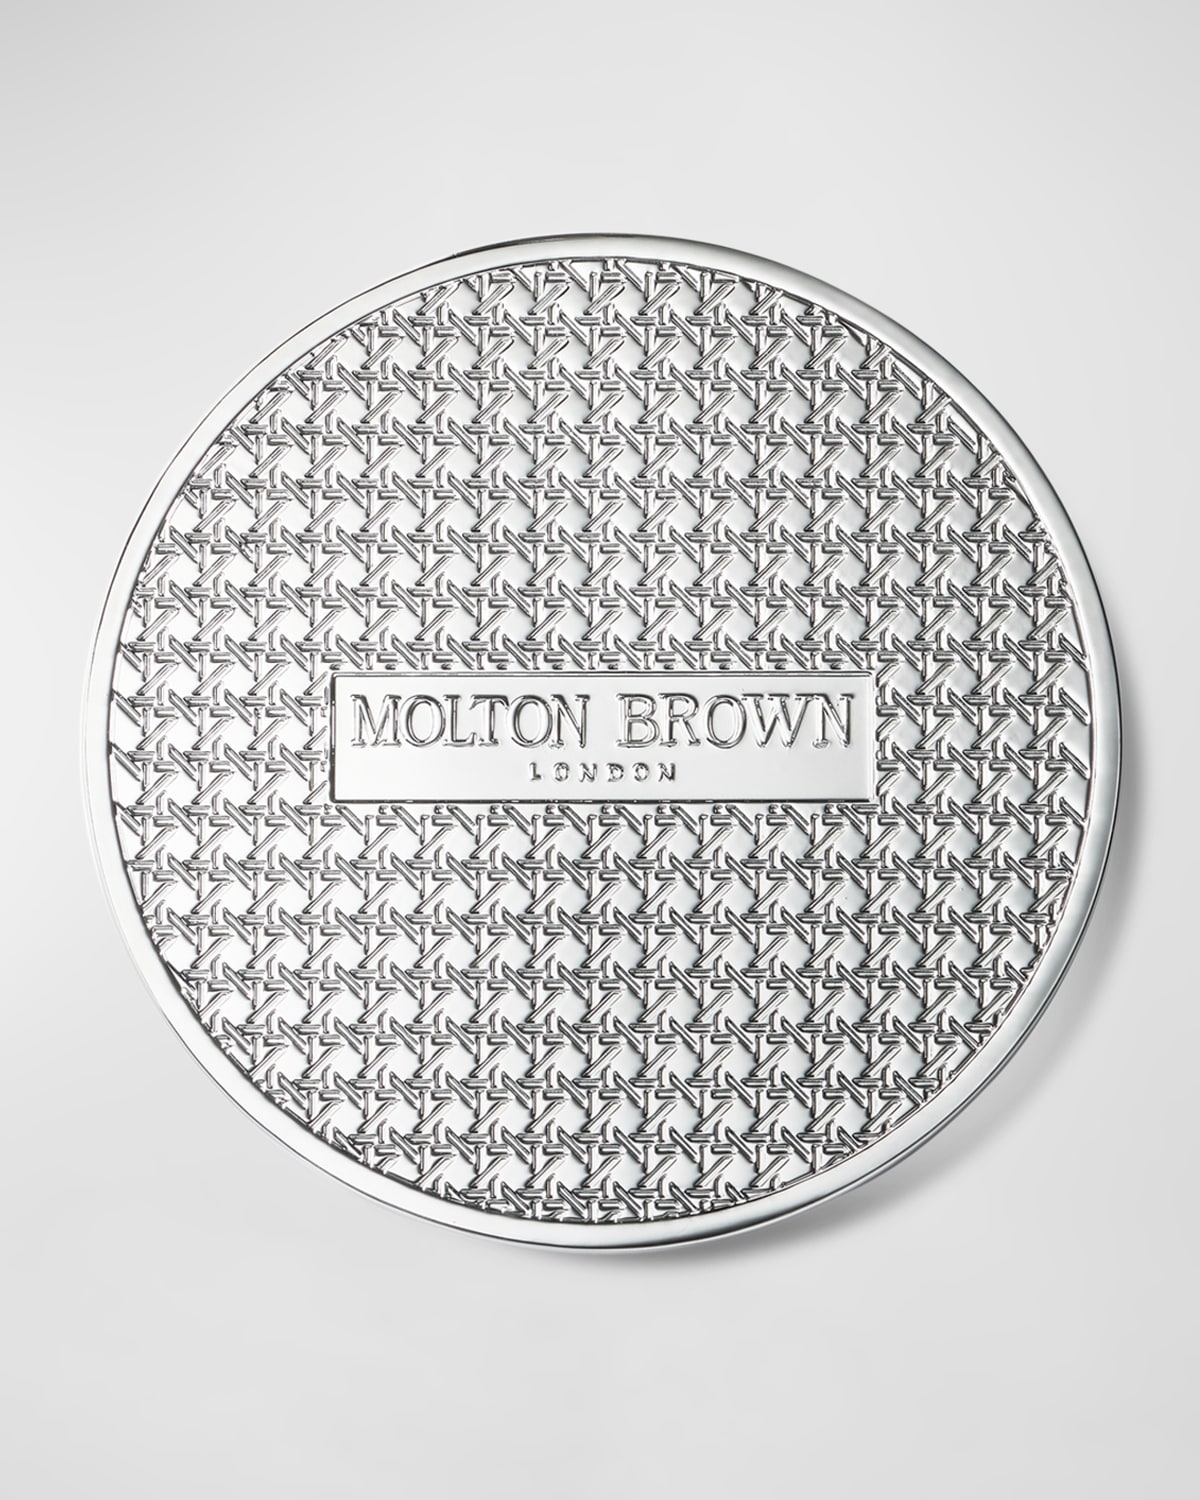 Molton Brown Luxury Candle Lid, Triple Wick In Gray